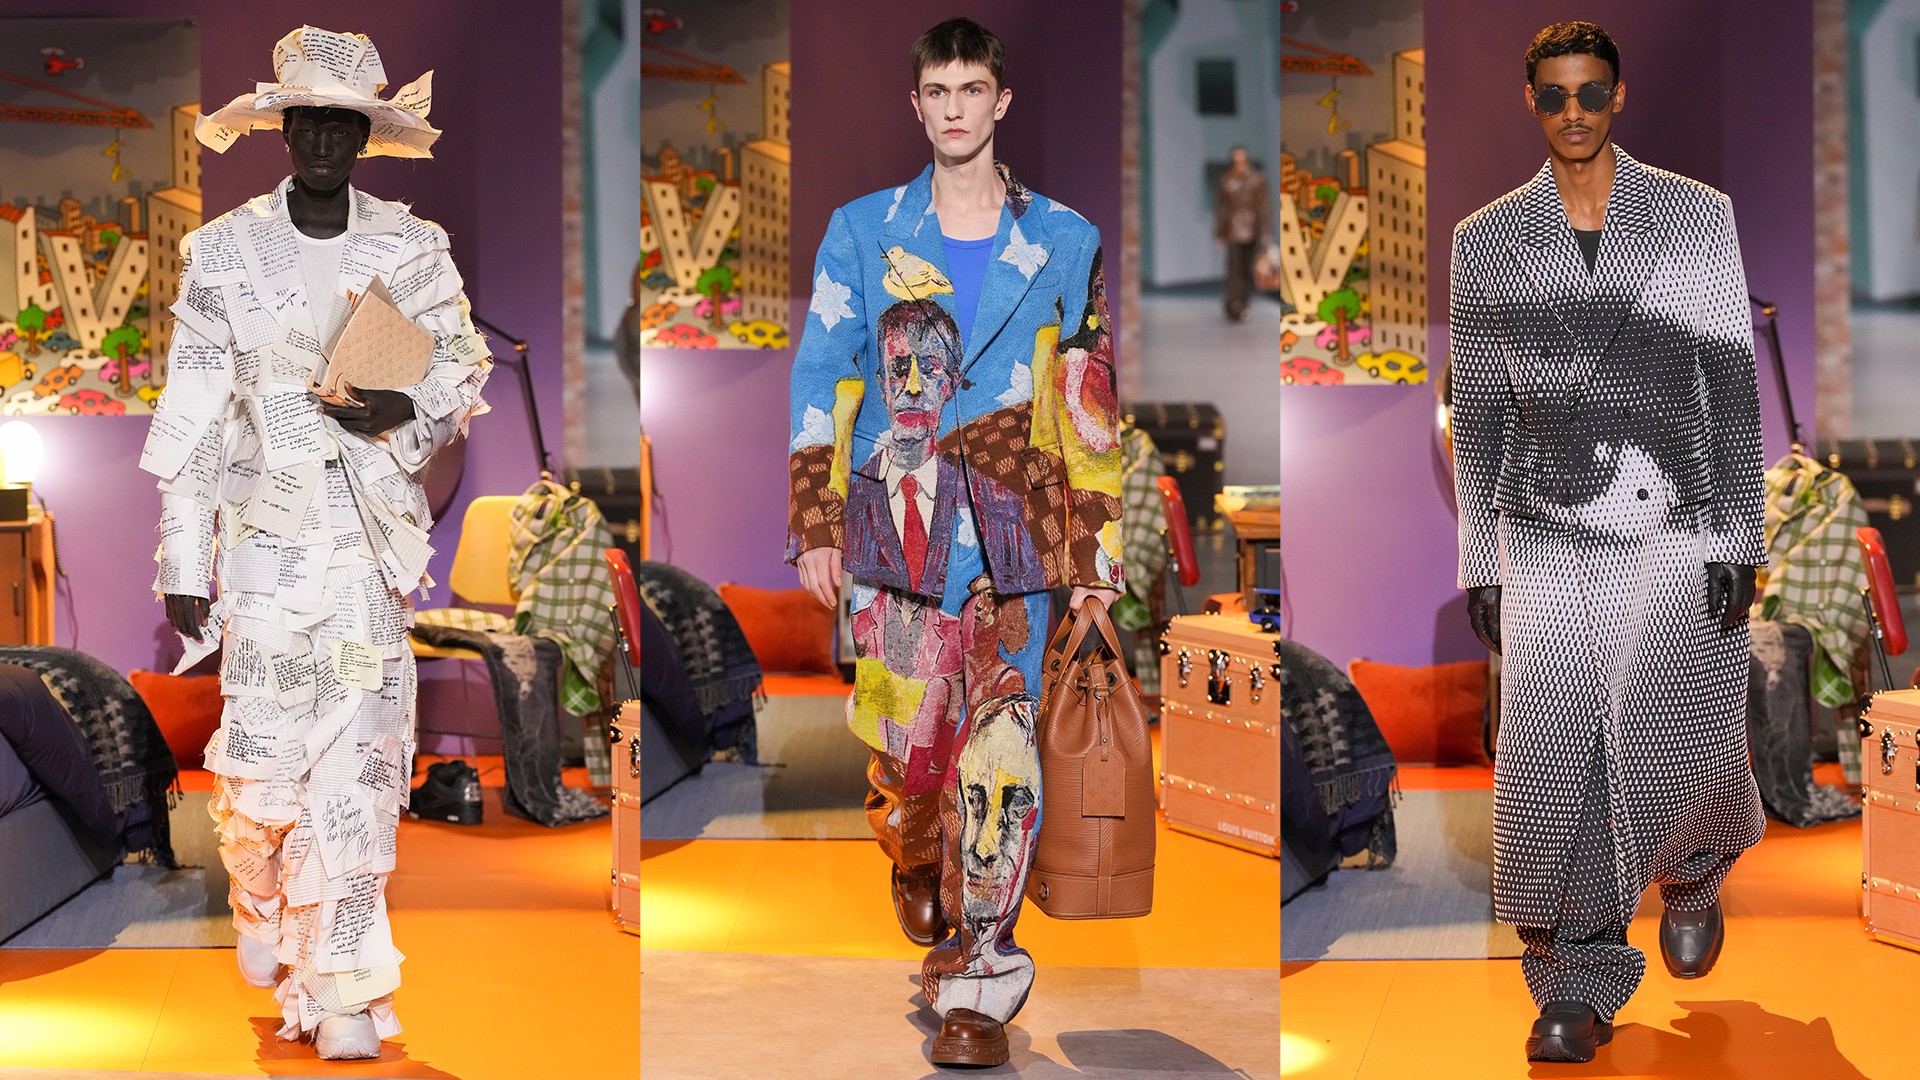 Louis Vuitton's colourful ode to the imaginary was soundtracked by Rosalía